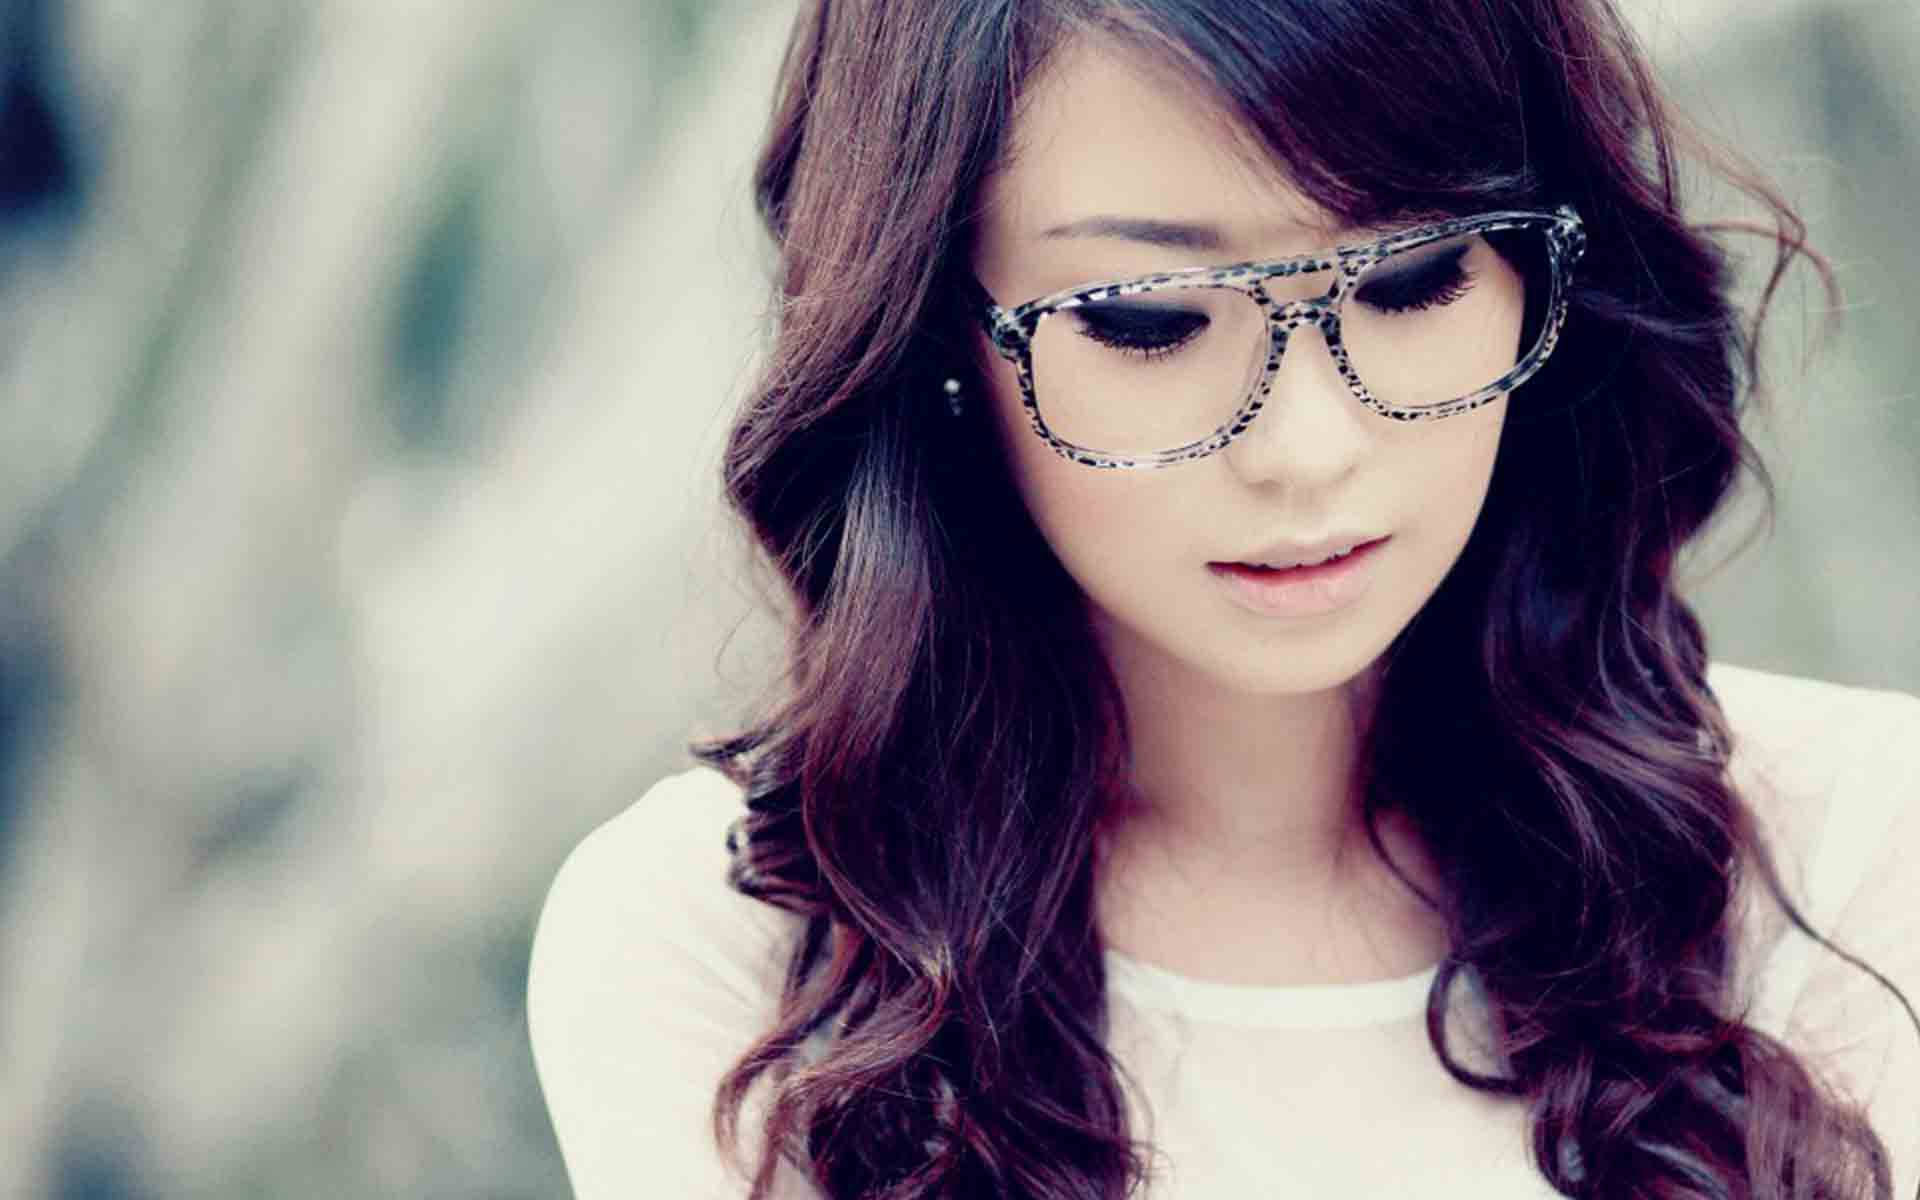 Asian Cute Girl With Glasses Wallpaper